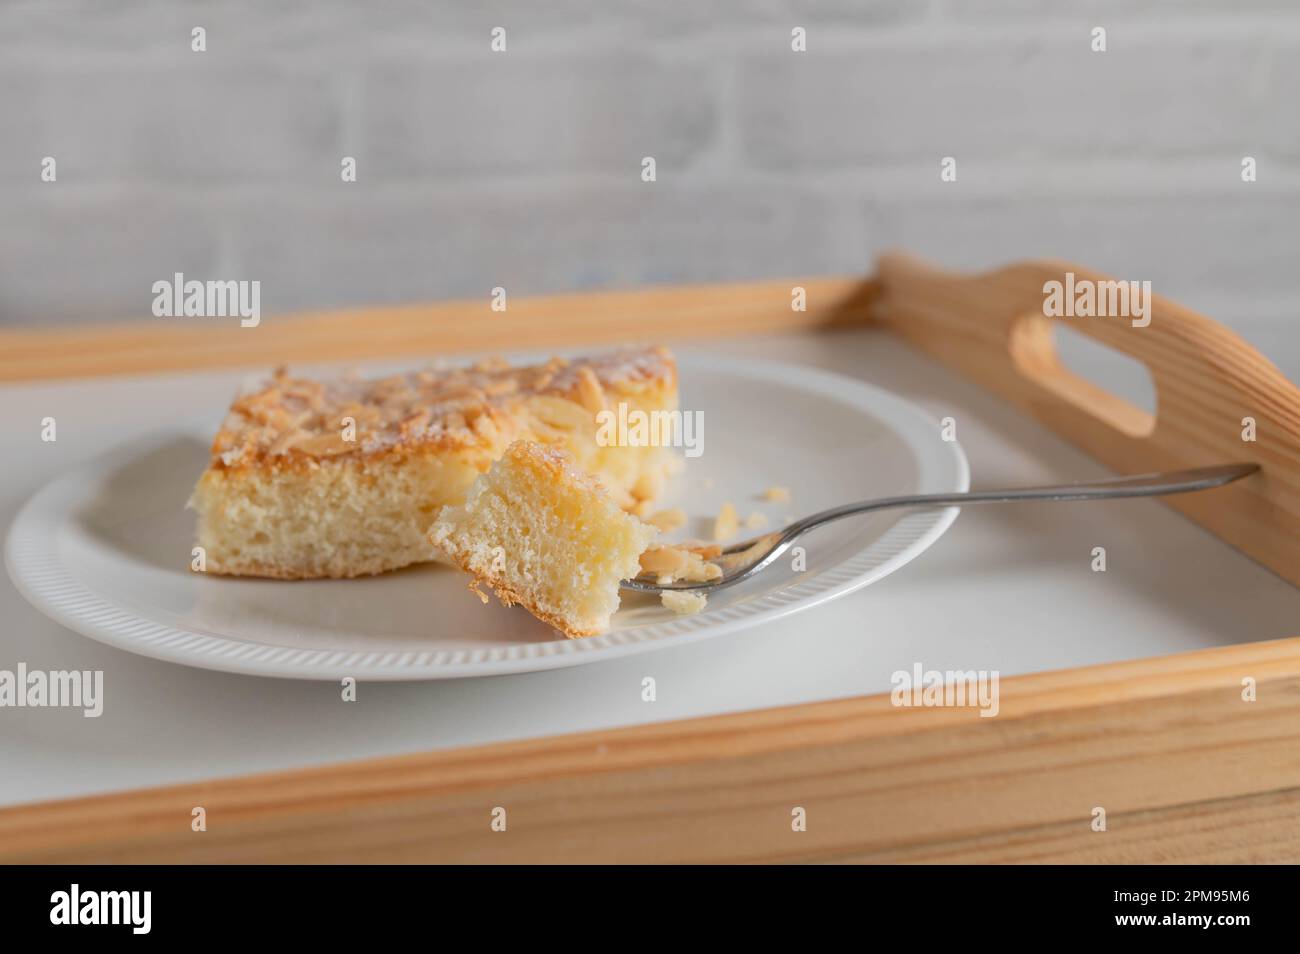 Butter cake with almond, sugar topping. Traditional german yeast cake served on a plate Stock Photo